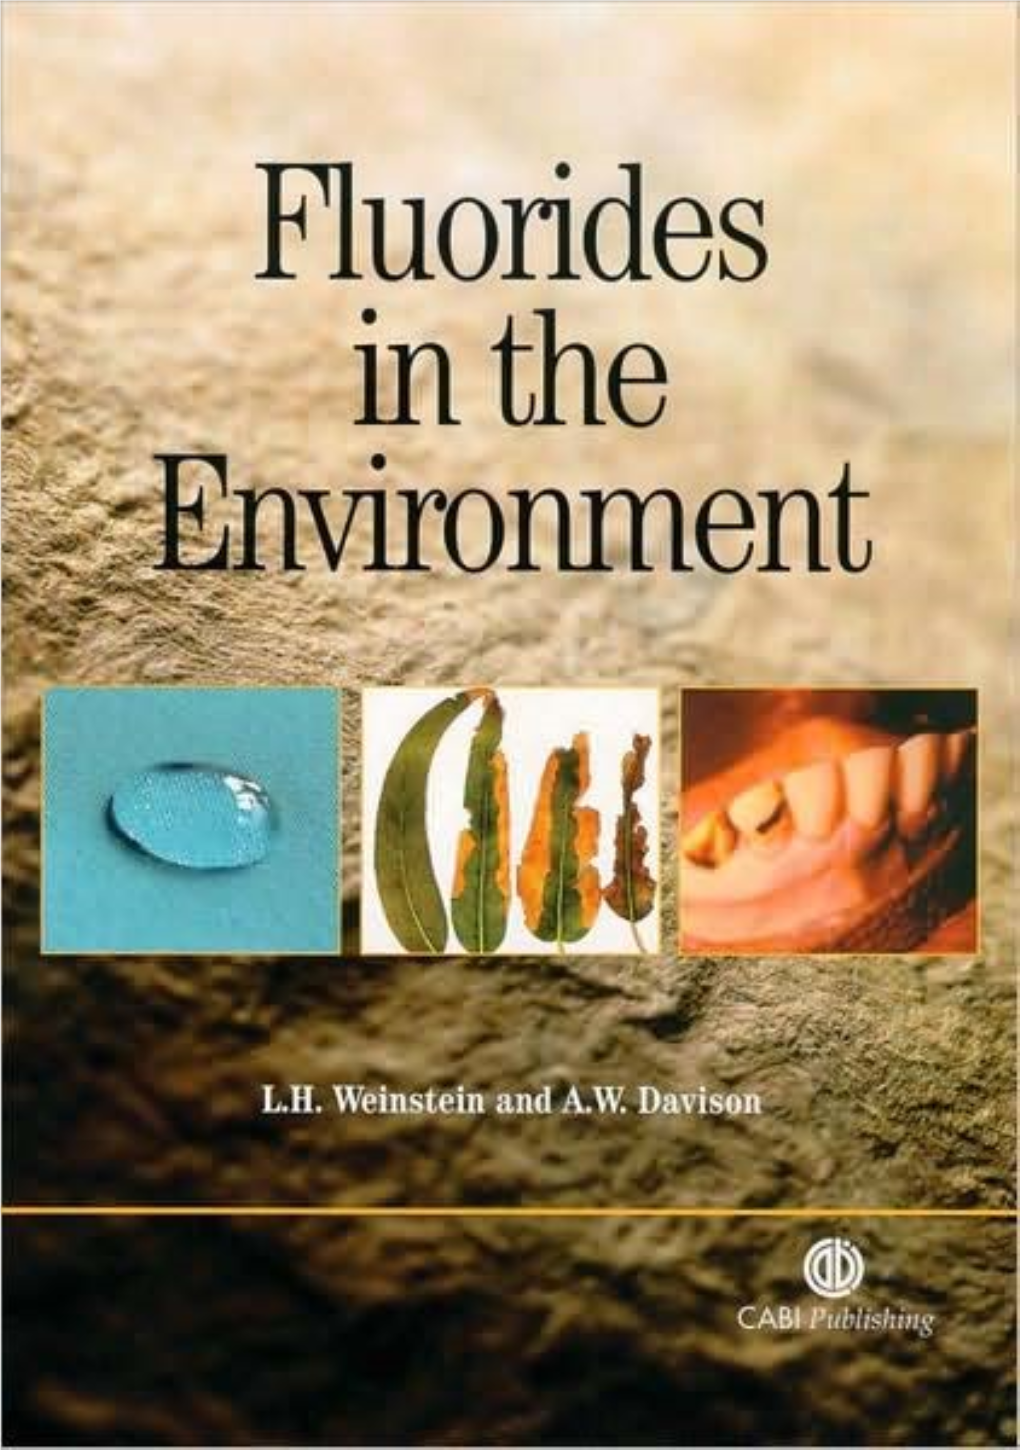 Fluorides in the Environment